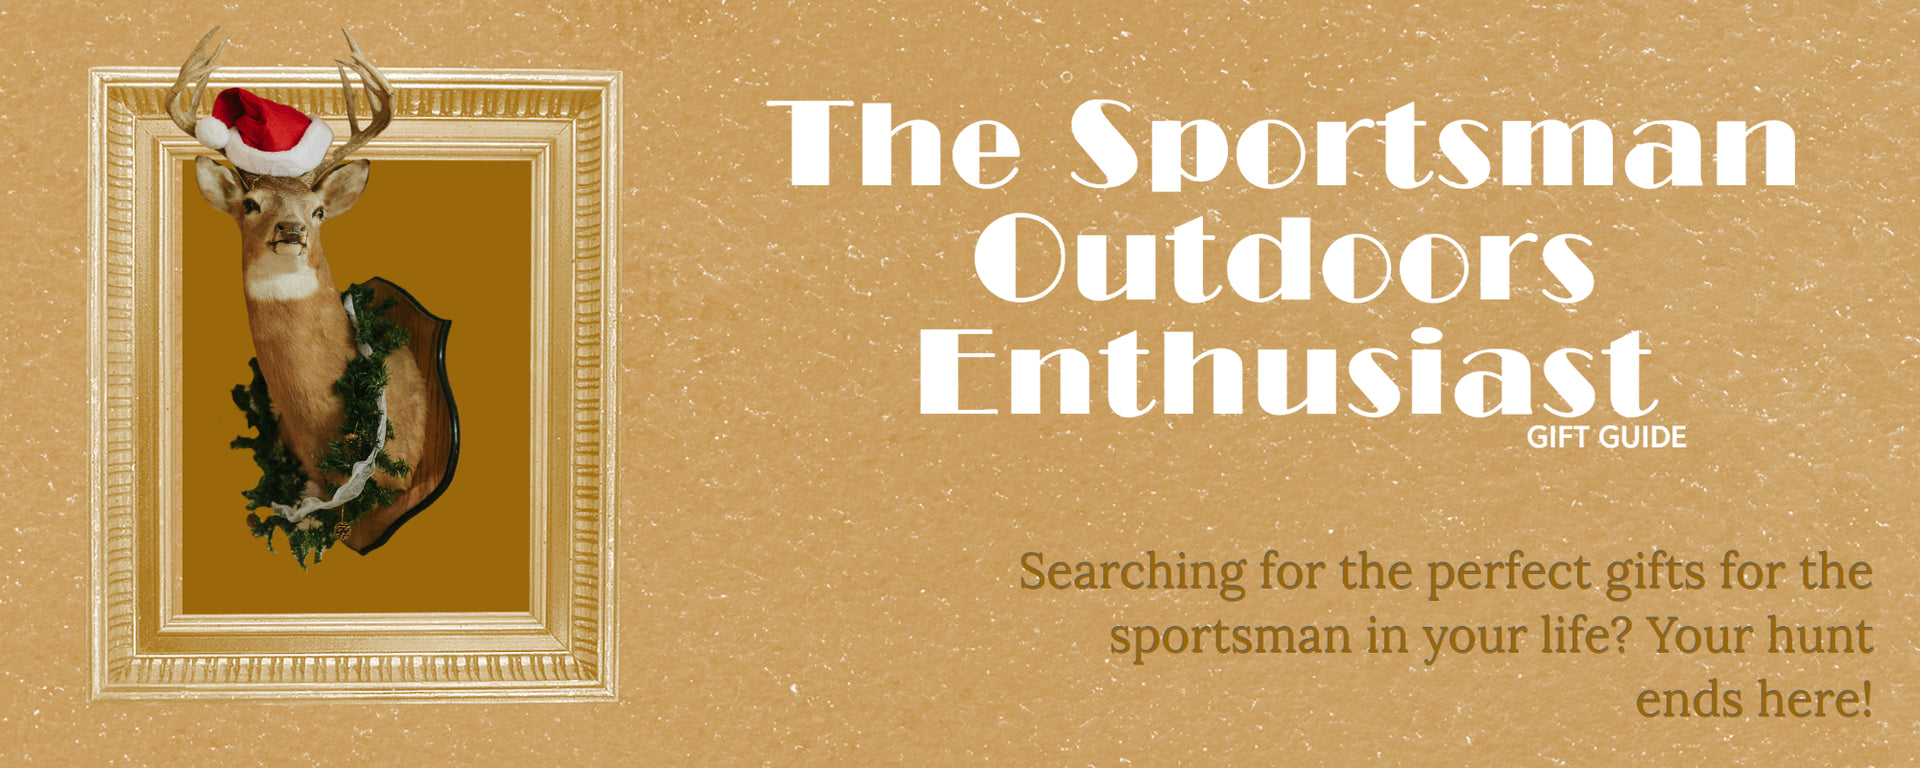 Gifts for the Sportsman